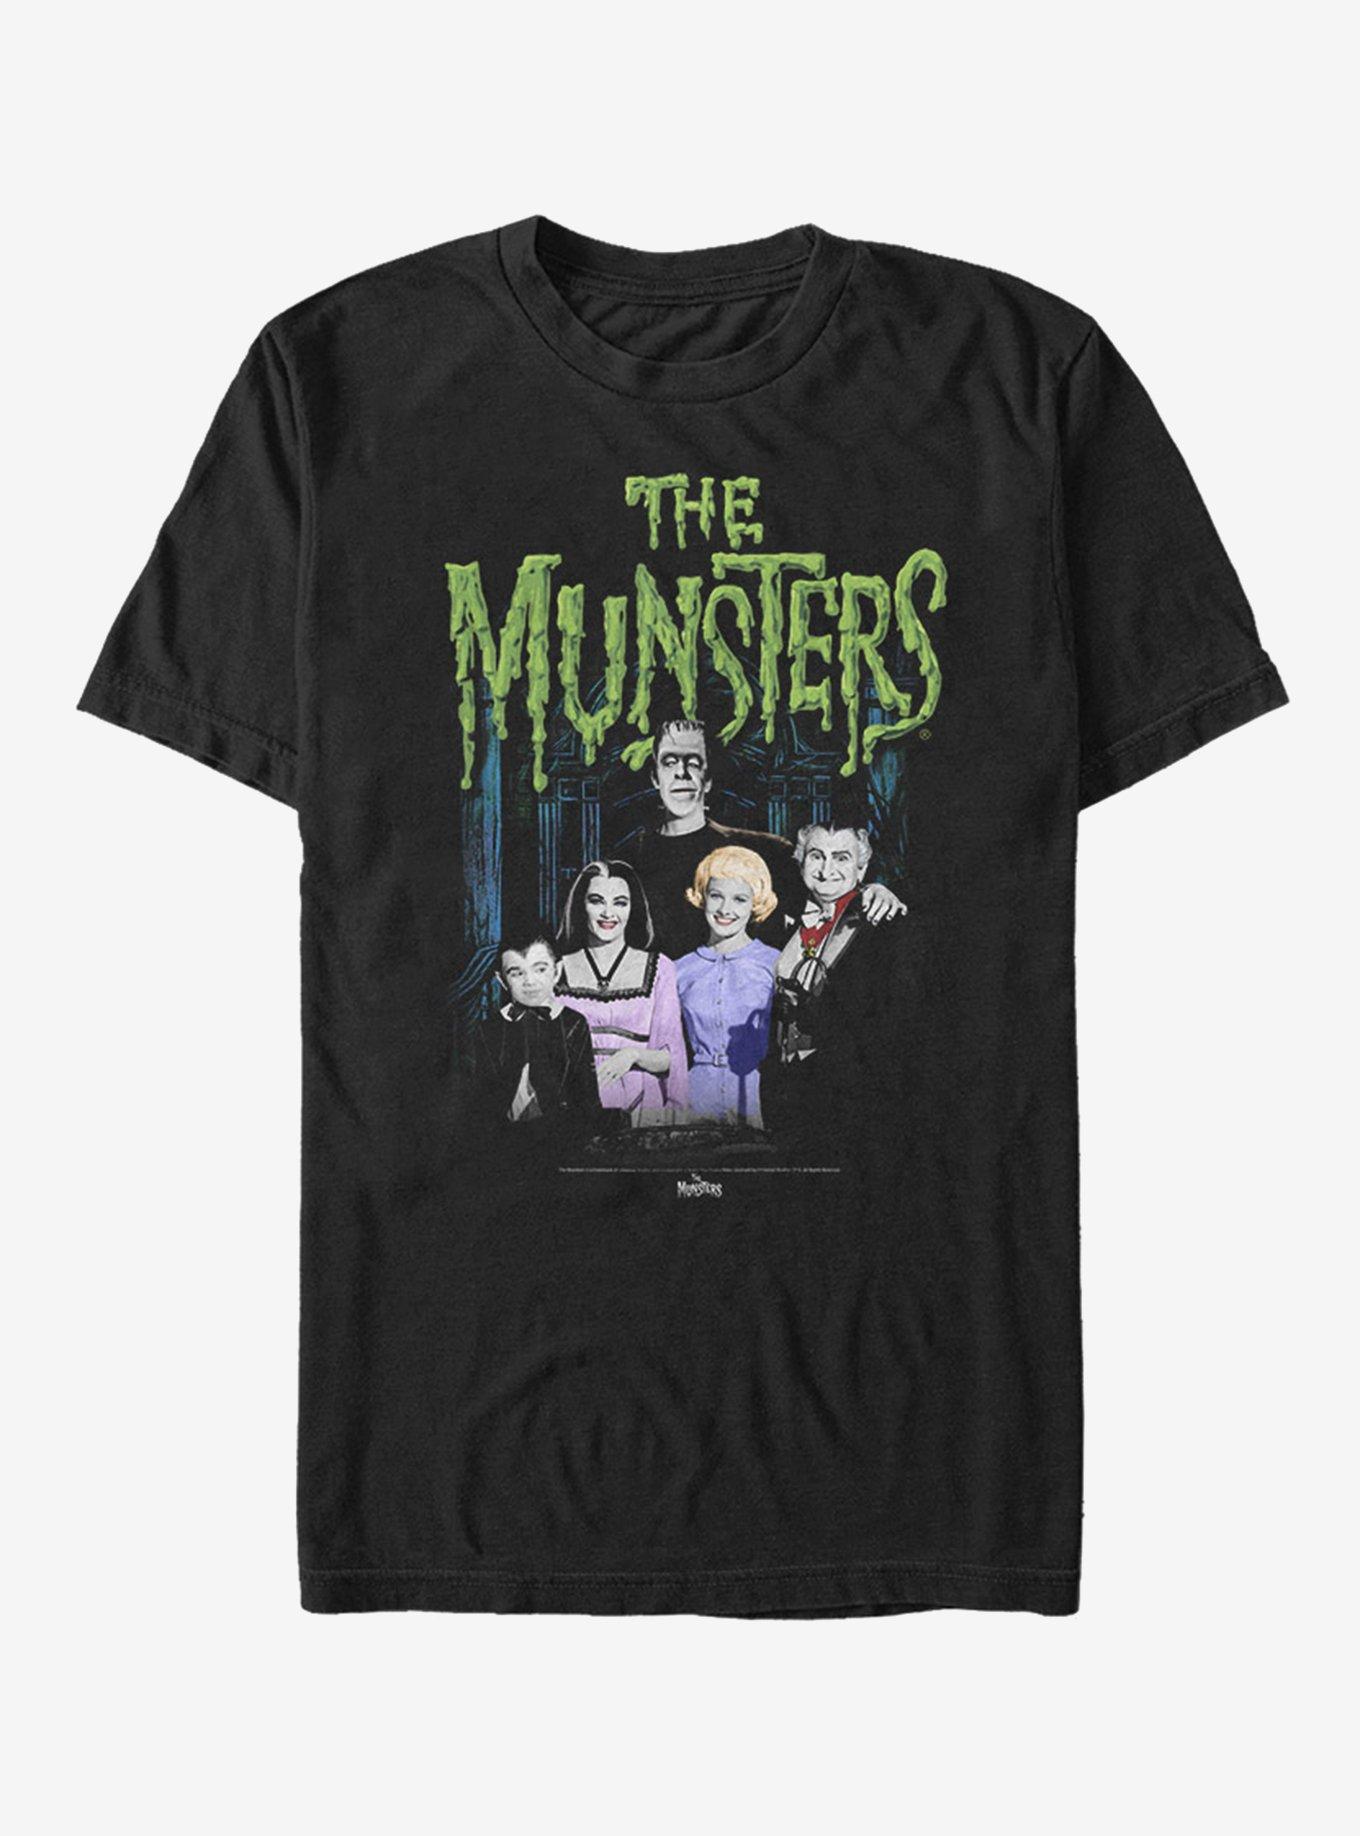 Poster T-shirts from TemplateMonster